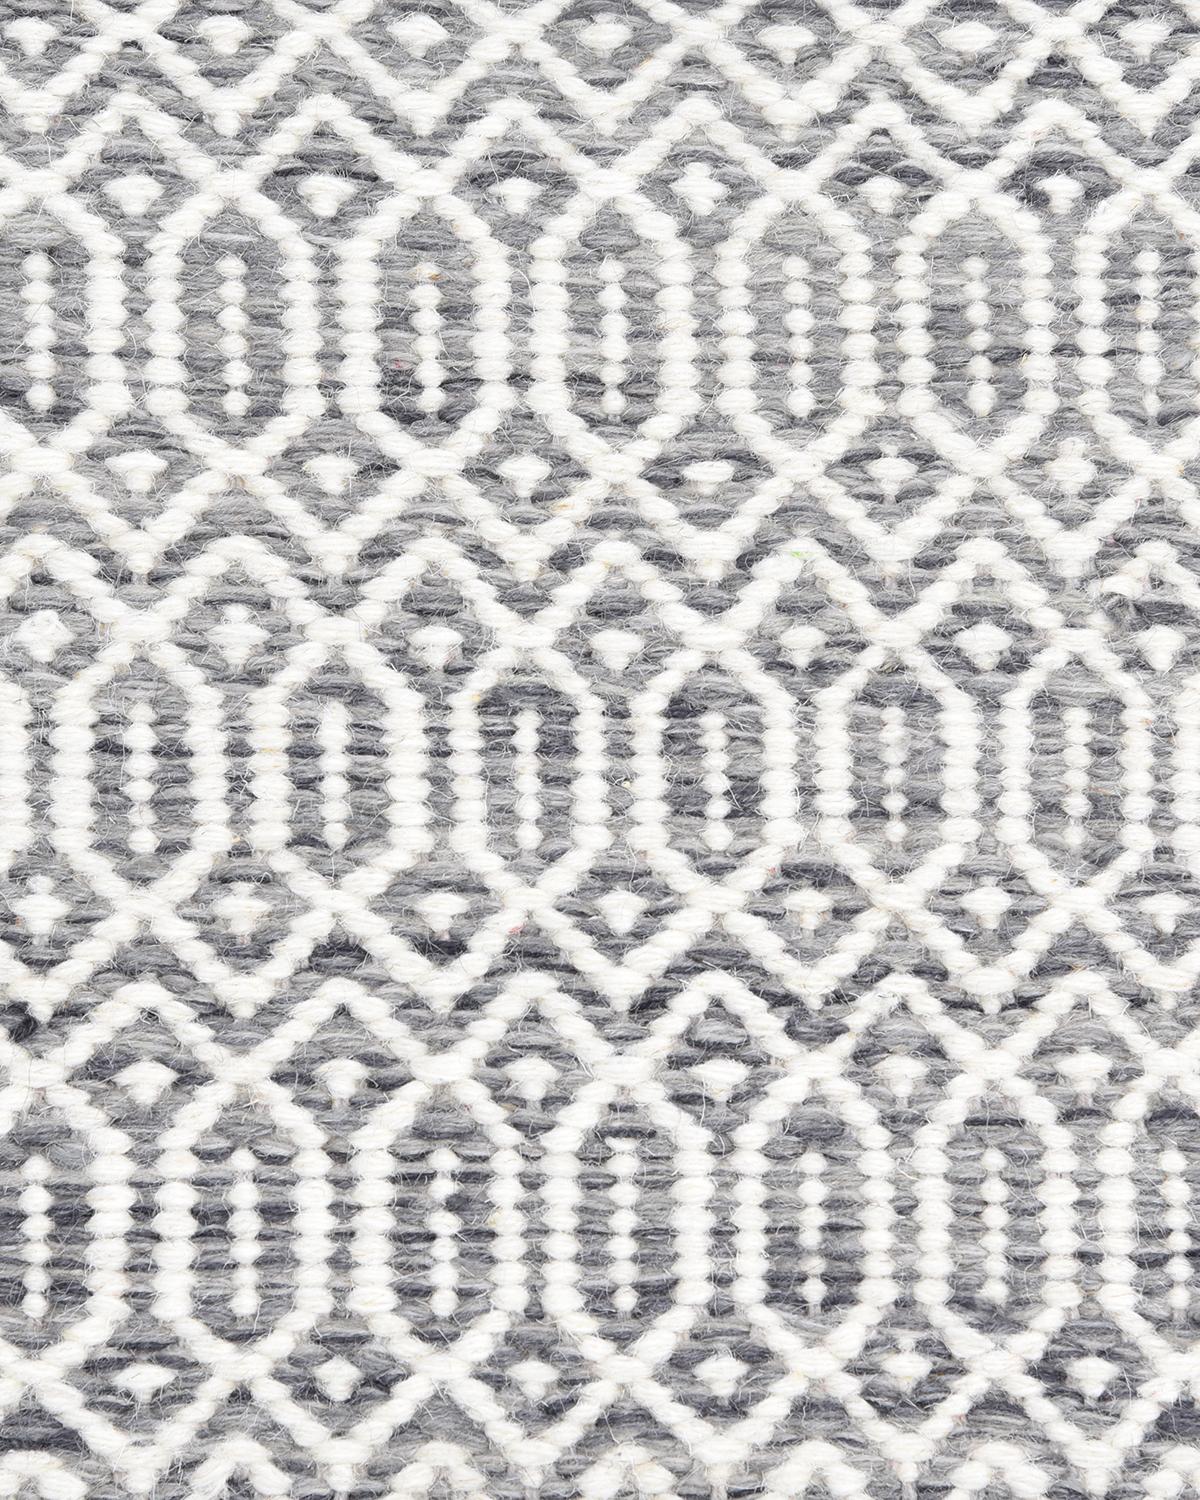 Solo Rugs Chatham Contemporary Geometric Handmade Area Rug Grey In New Condition For Sale In Norwalk, CT